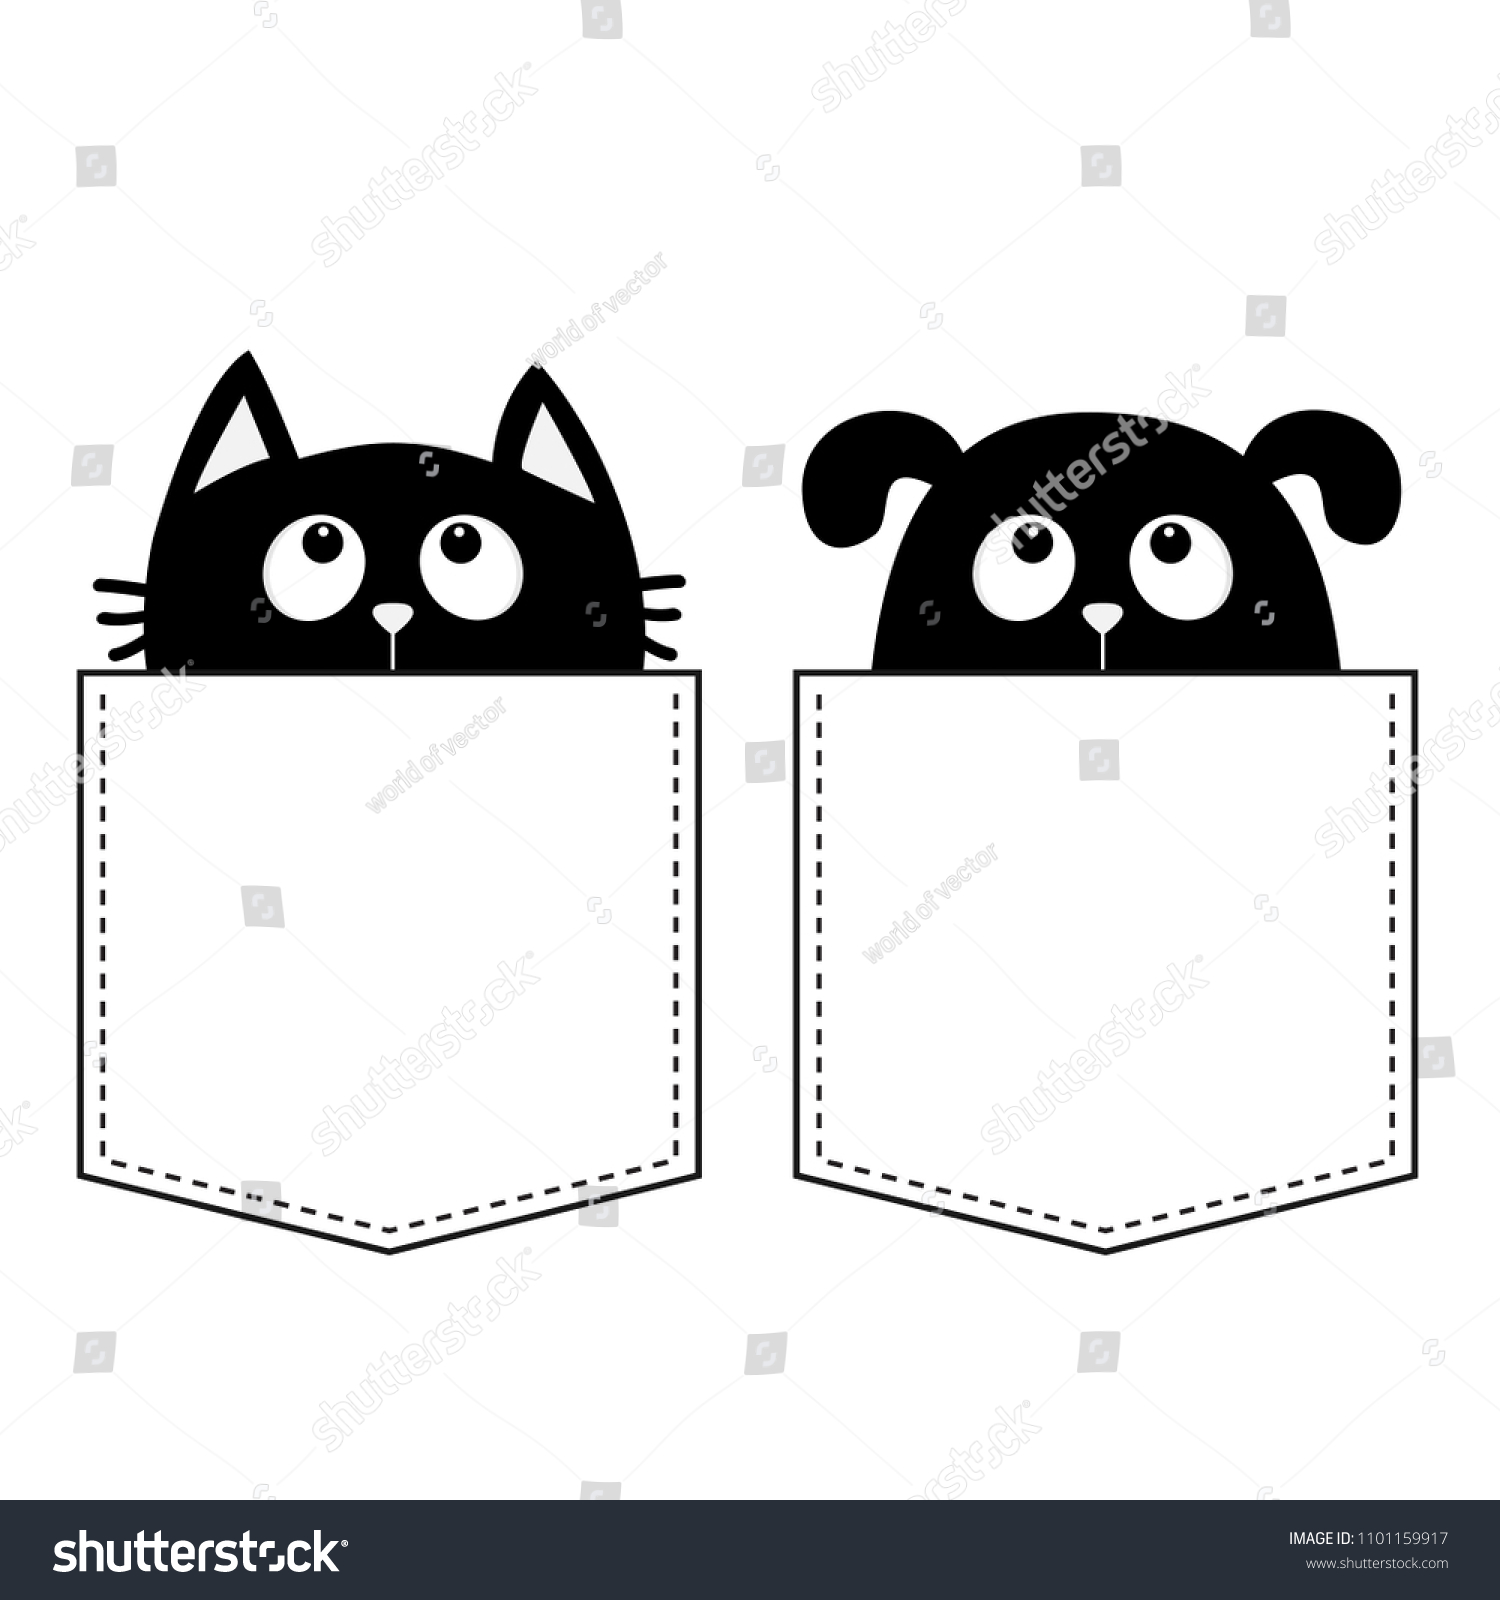 SVG of Cat Dog in the pocket. Cute cartoon animals. Kitten kitty Puppy pooch contour character. Dash line. Pet animal collection. White and black color. T-shirt design. Baby background. Isolated. Flat Vector svg